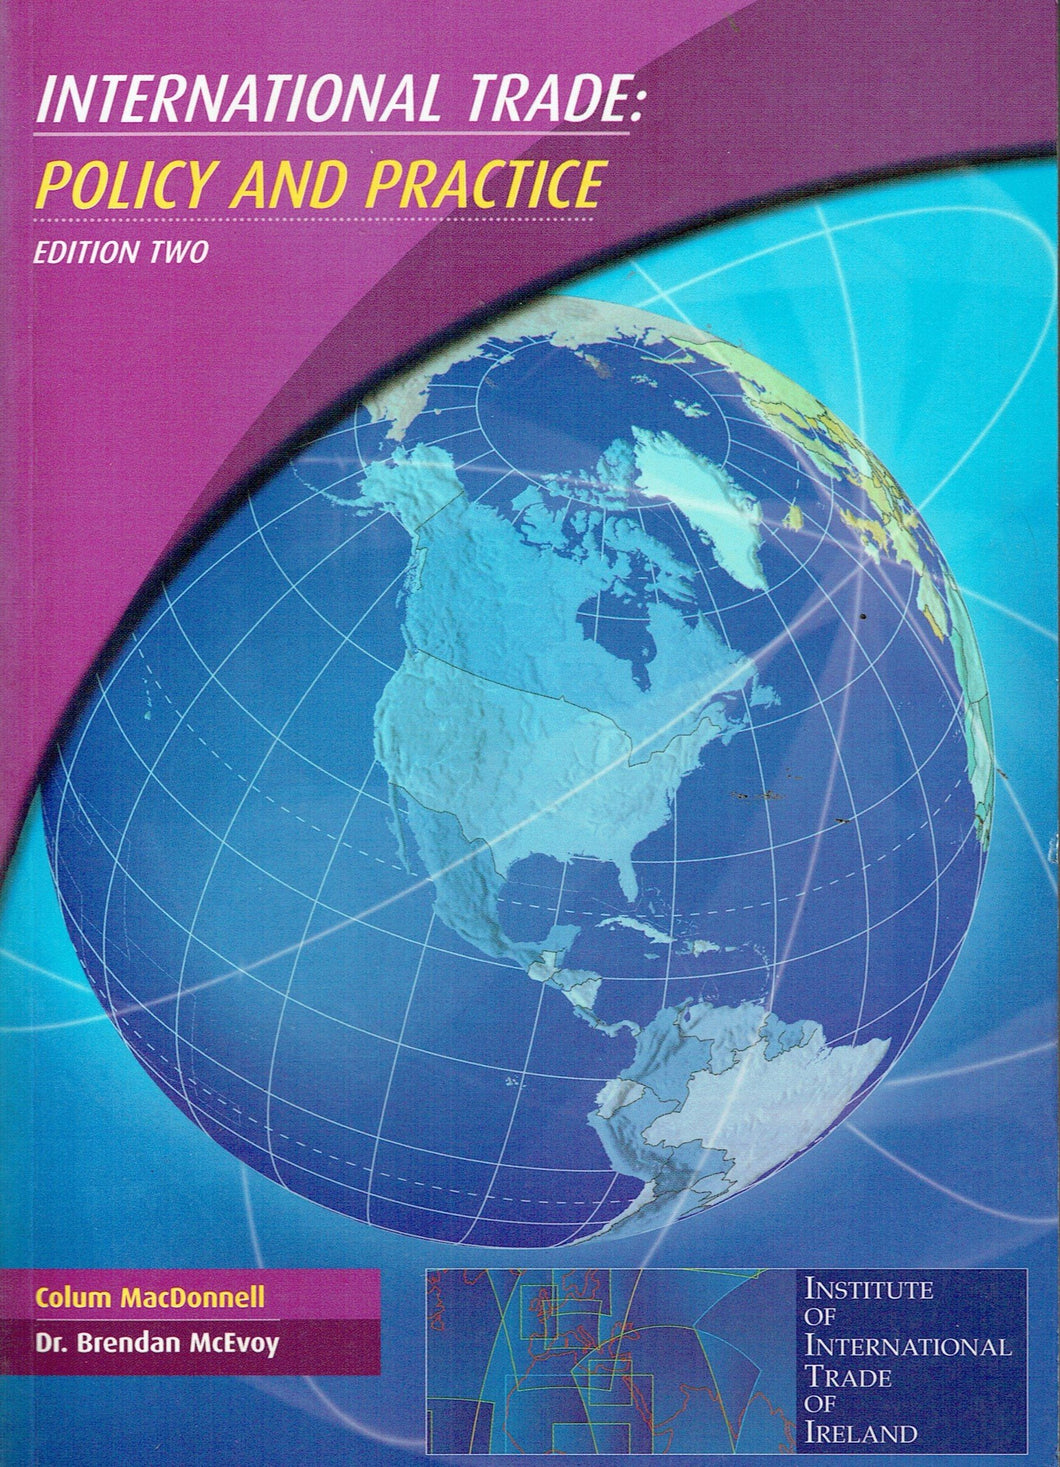 International Trade: Policy and Practice - Edition Two